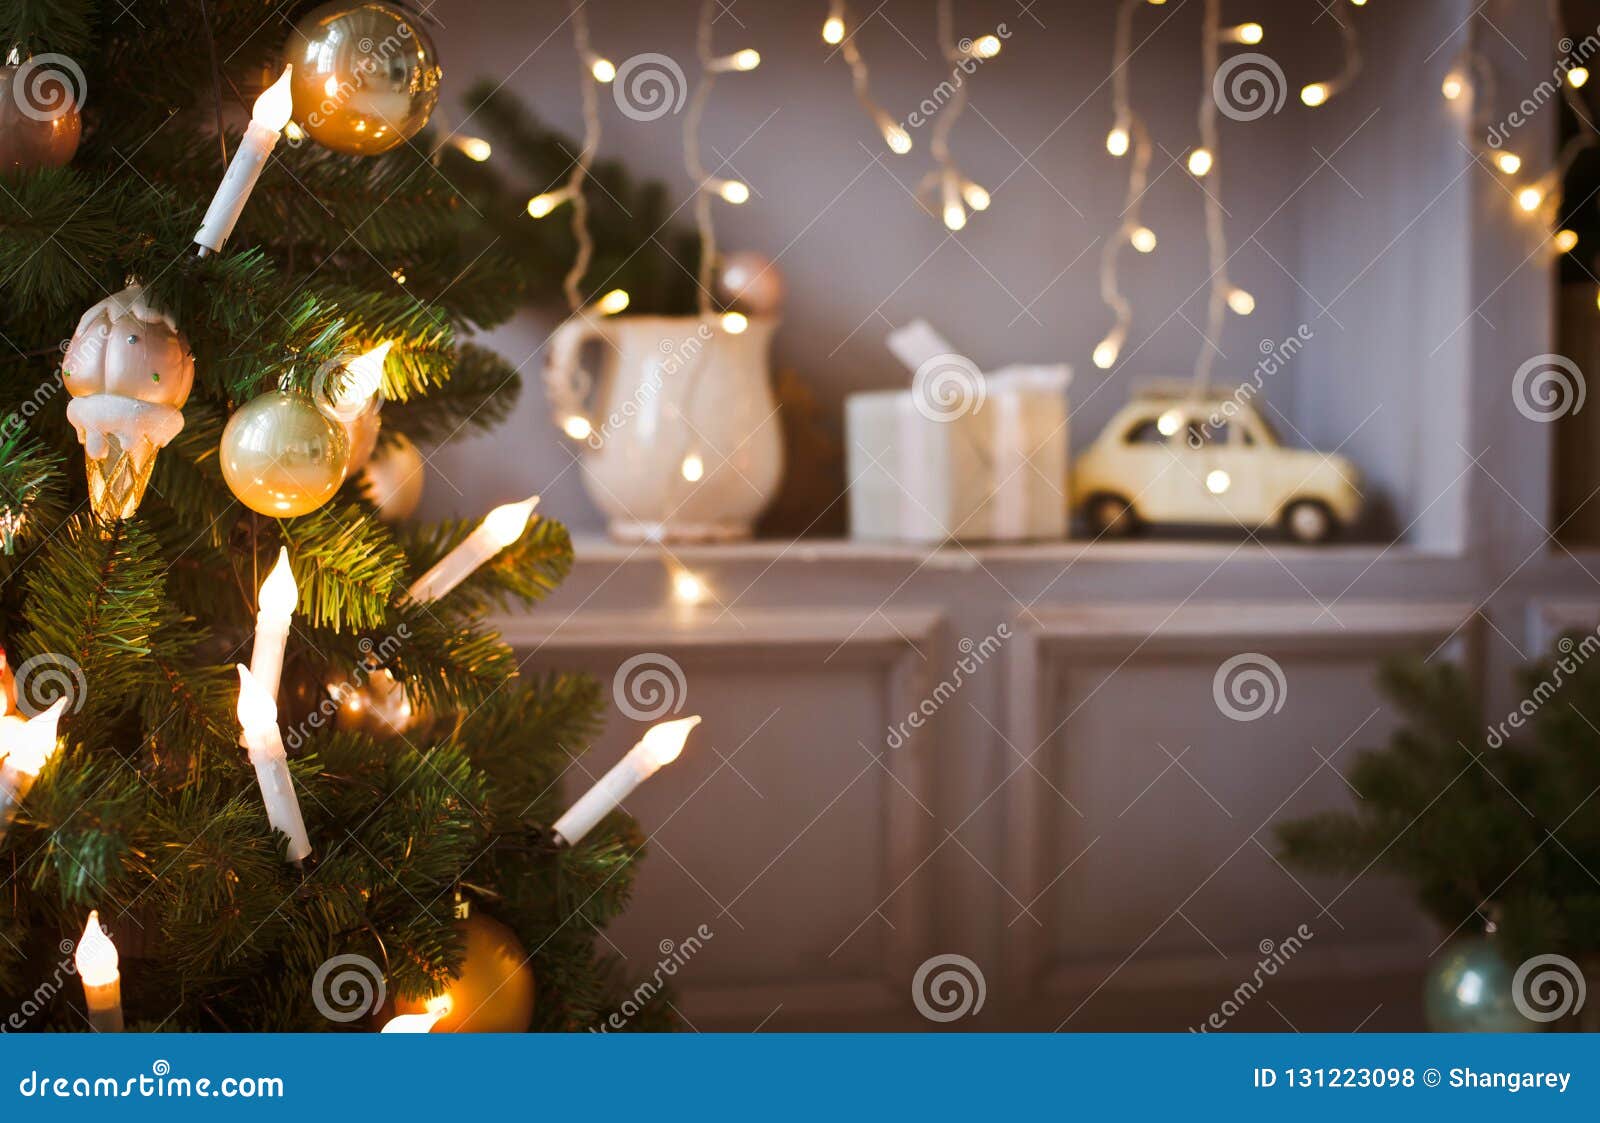 Christmas Background And New Year Interior Celebration